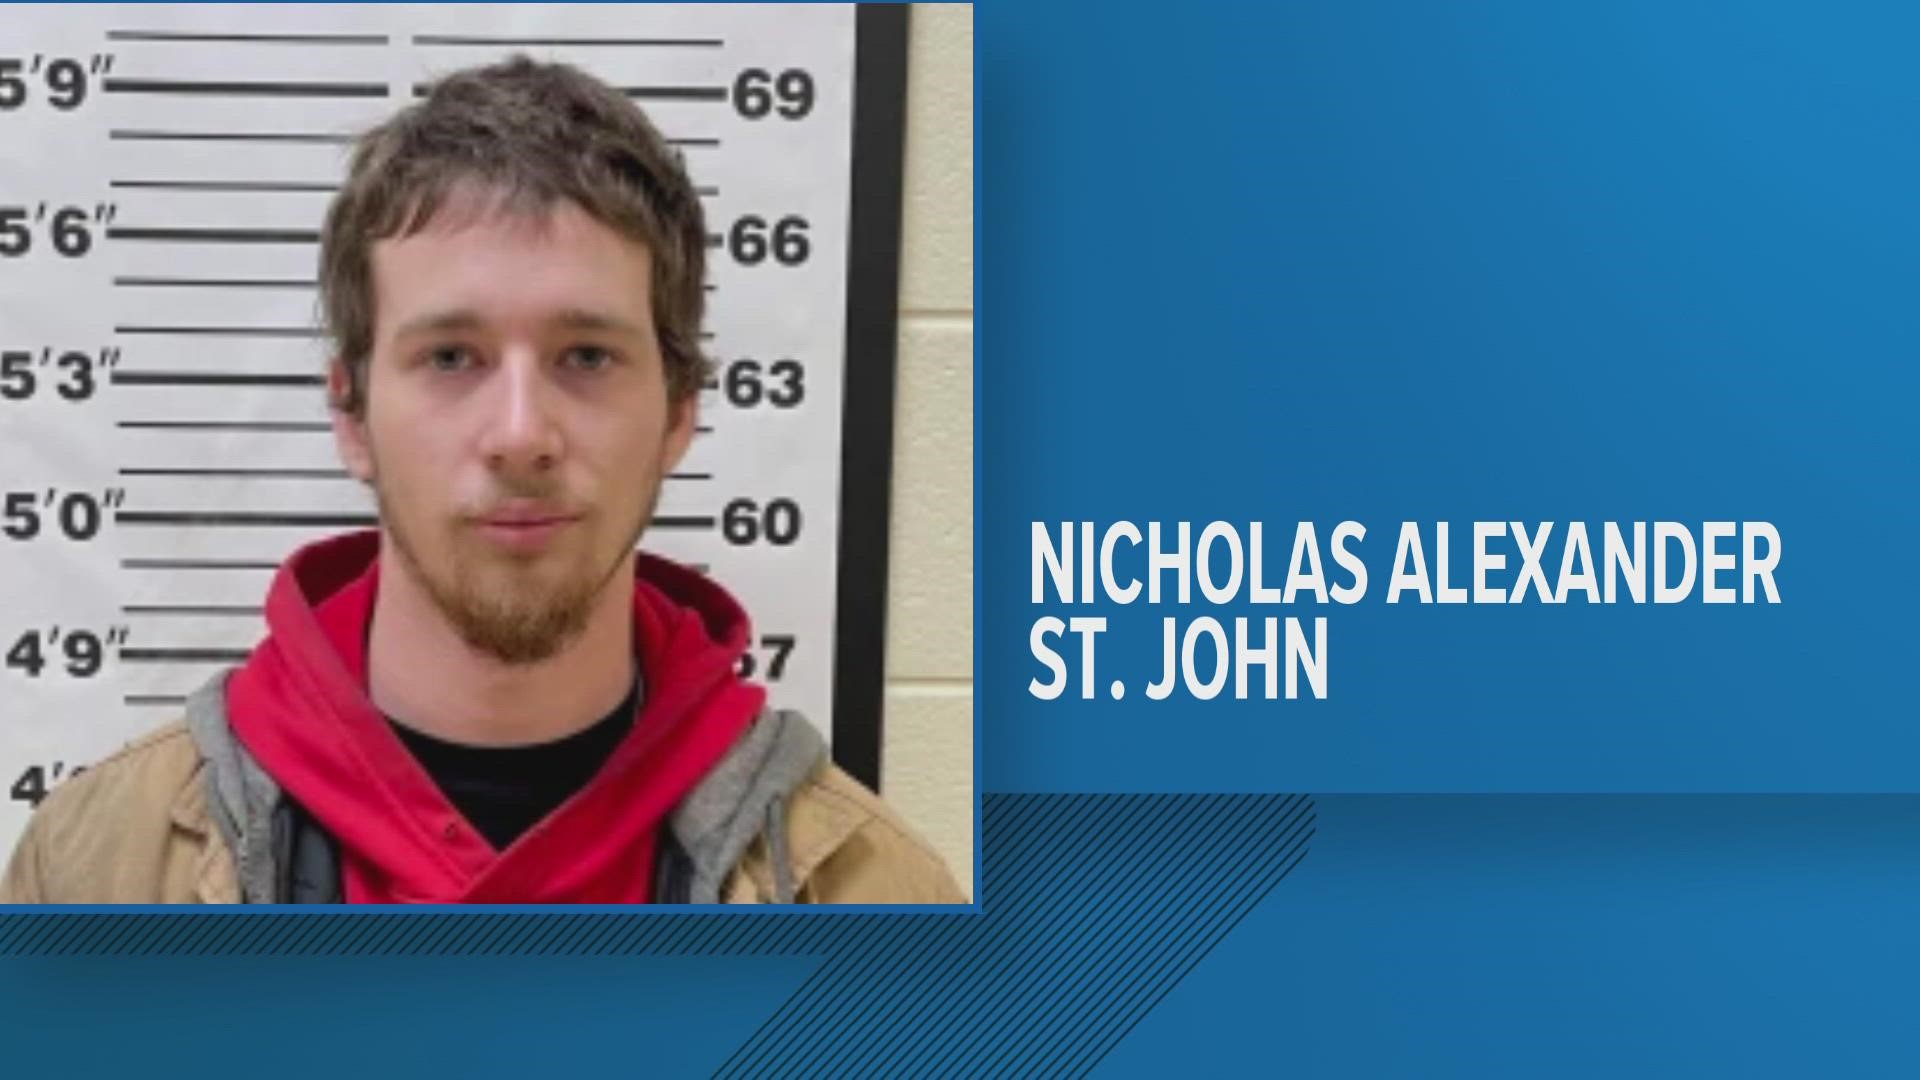 The Tennessee Bureau of Investigation said they started investigating Nicholas Alexander St. John, 22, in October 2021.